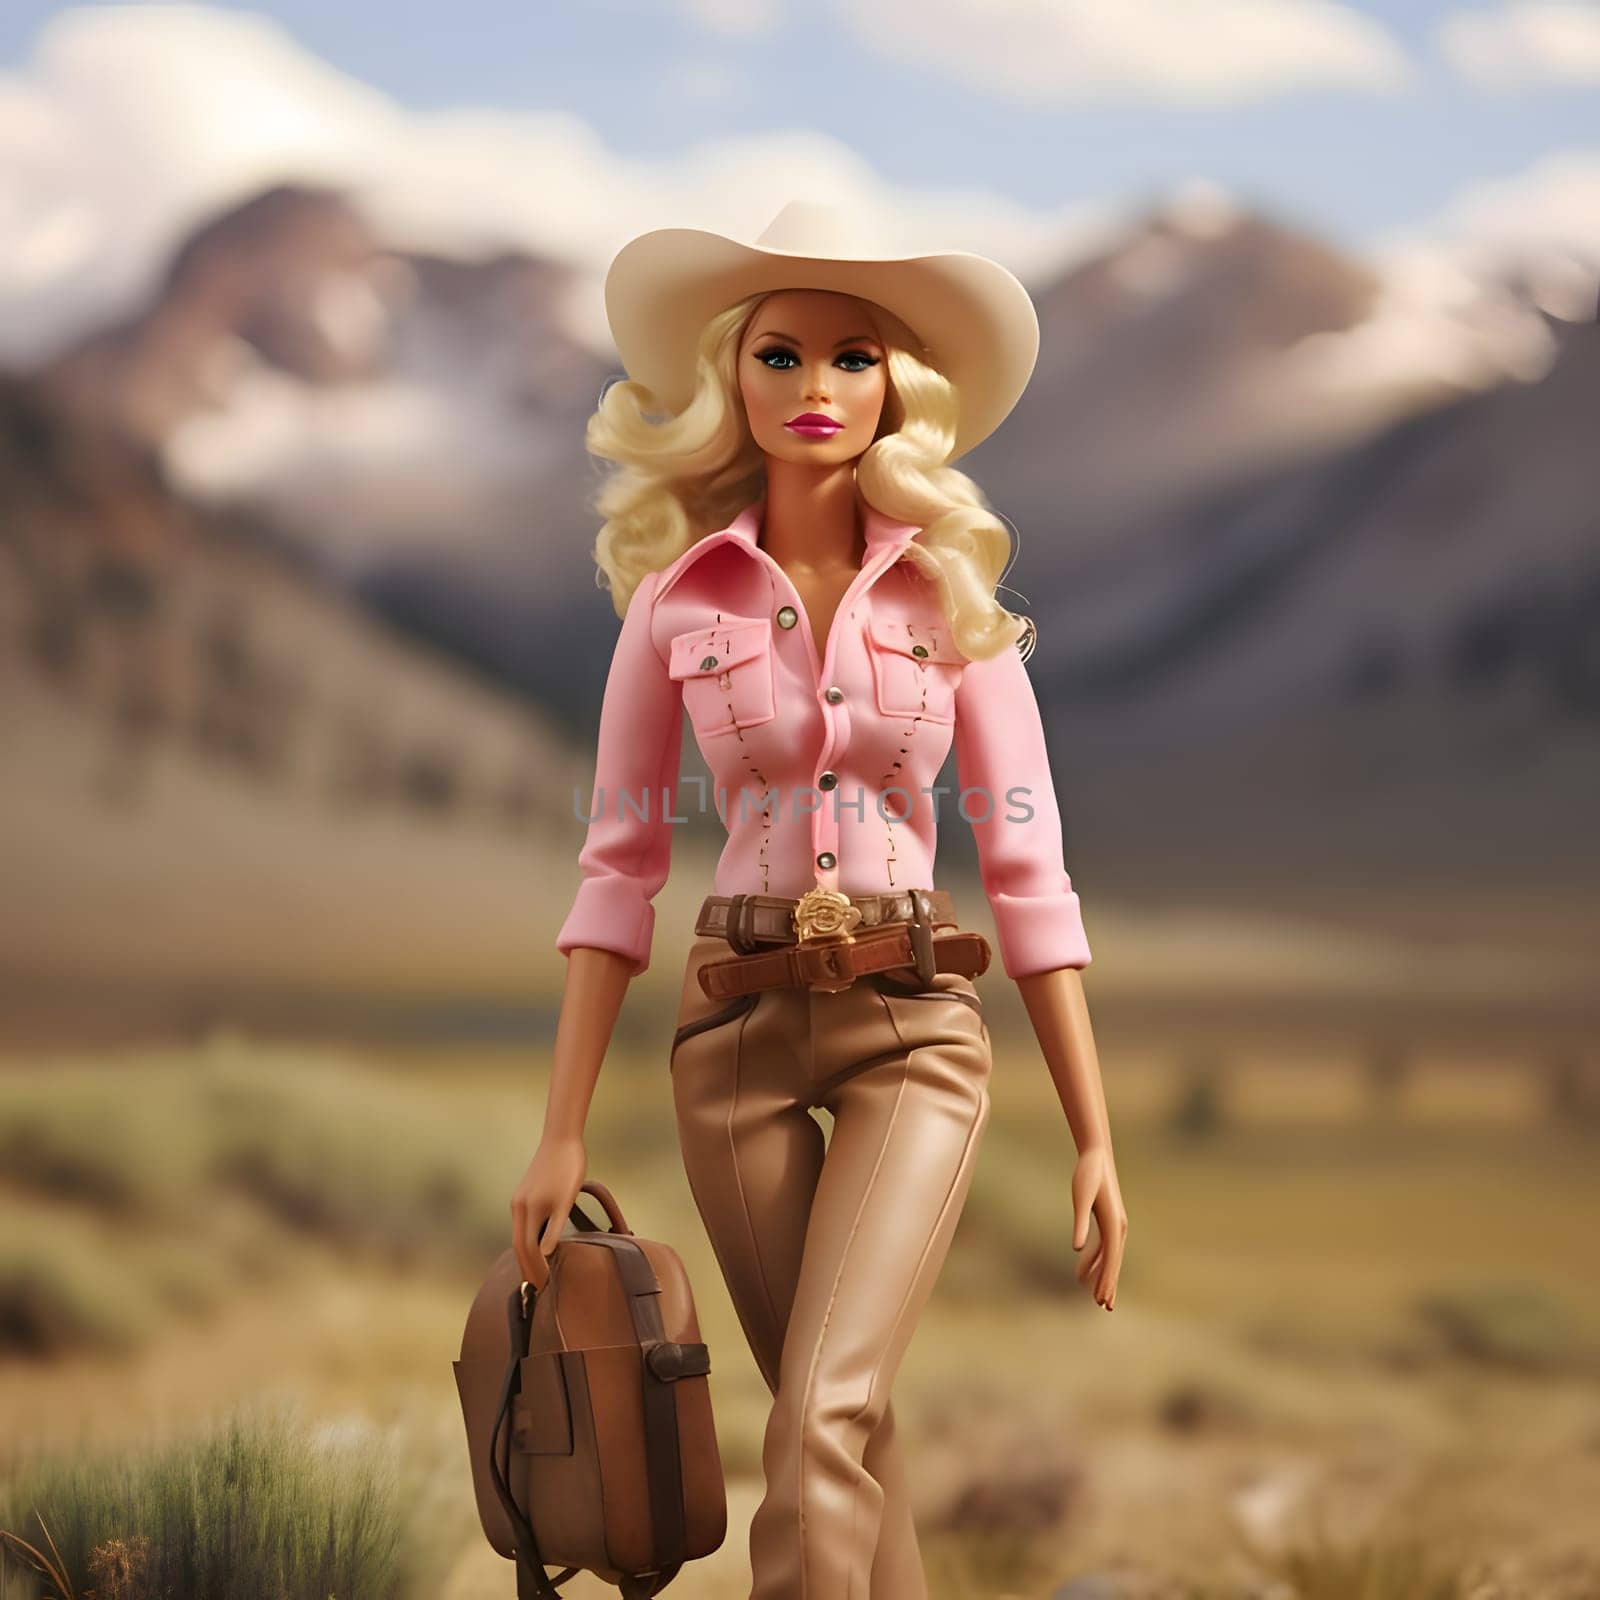 Cute blonde Barbie wearing a pink clothing posed with luggage against nature landscape background. Front view. by ThemesS